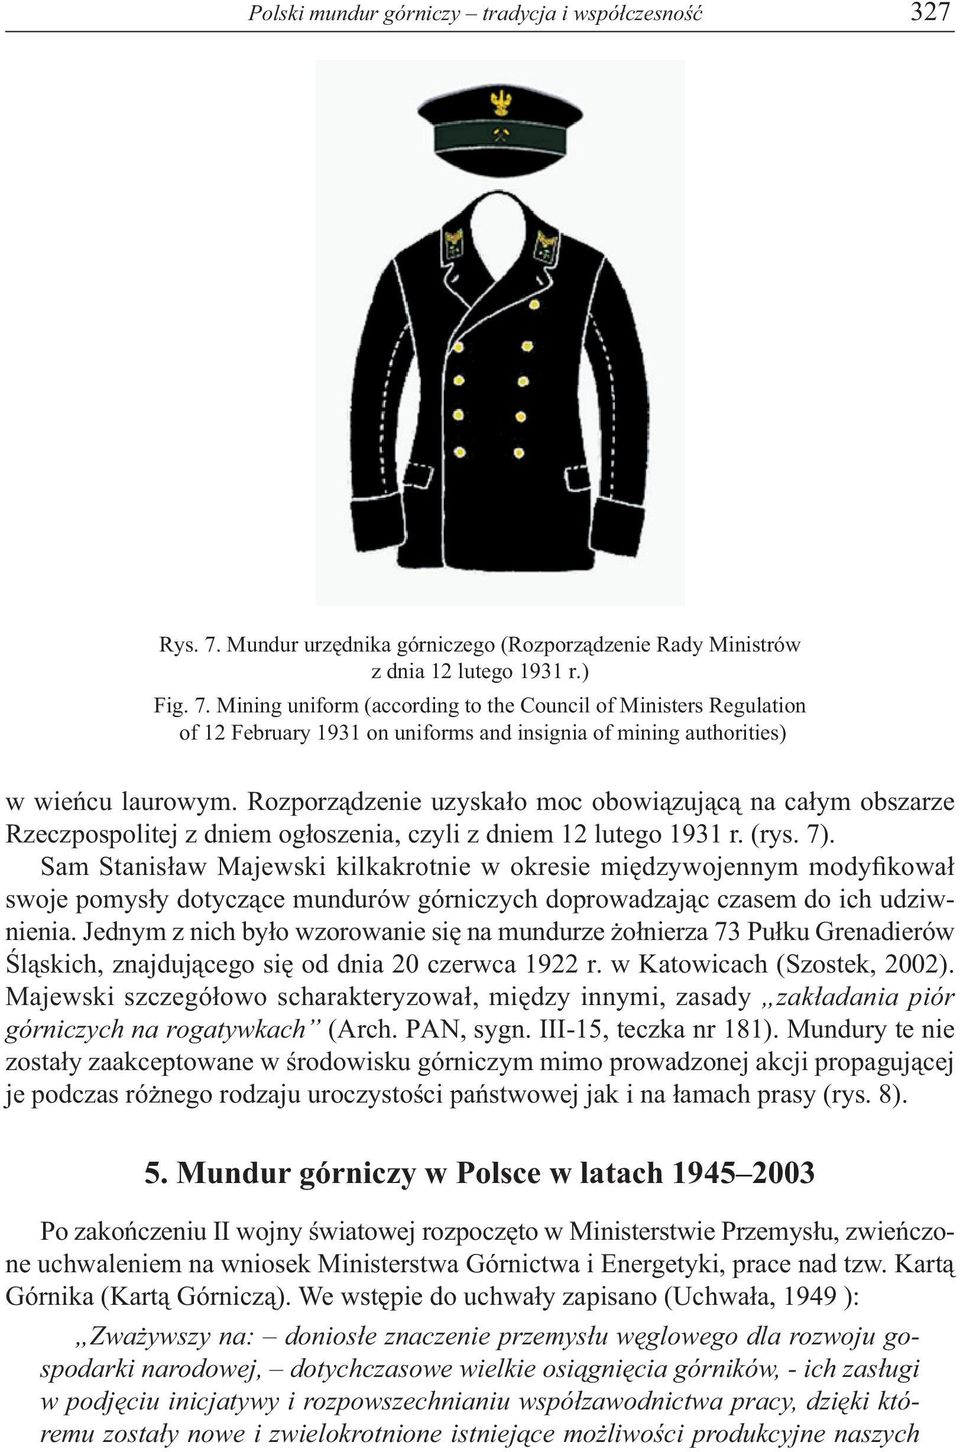 Mining uniform (according to the Council of Ministers Regulation of 12 February 1931 on uniforms and insignia of mining authorities) w wieńcu laurowym.